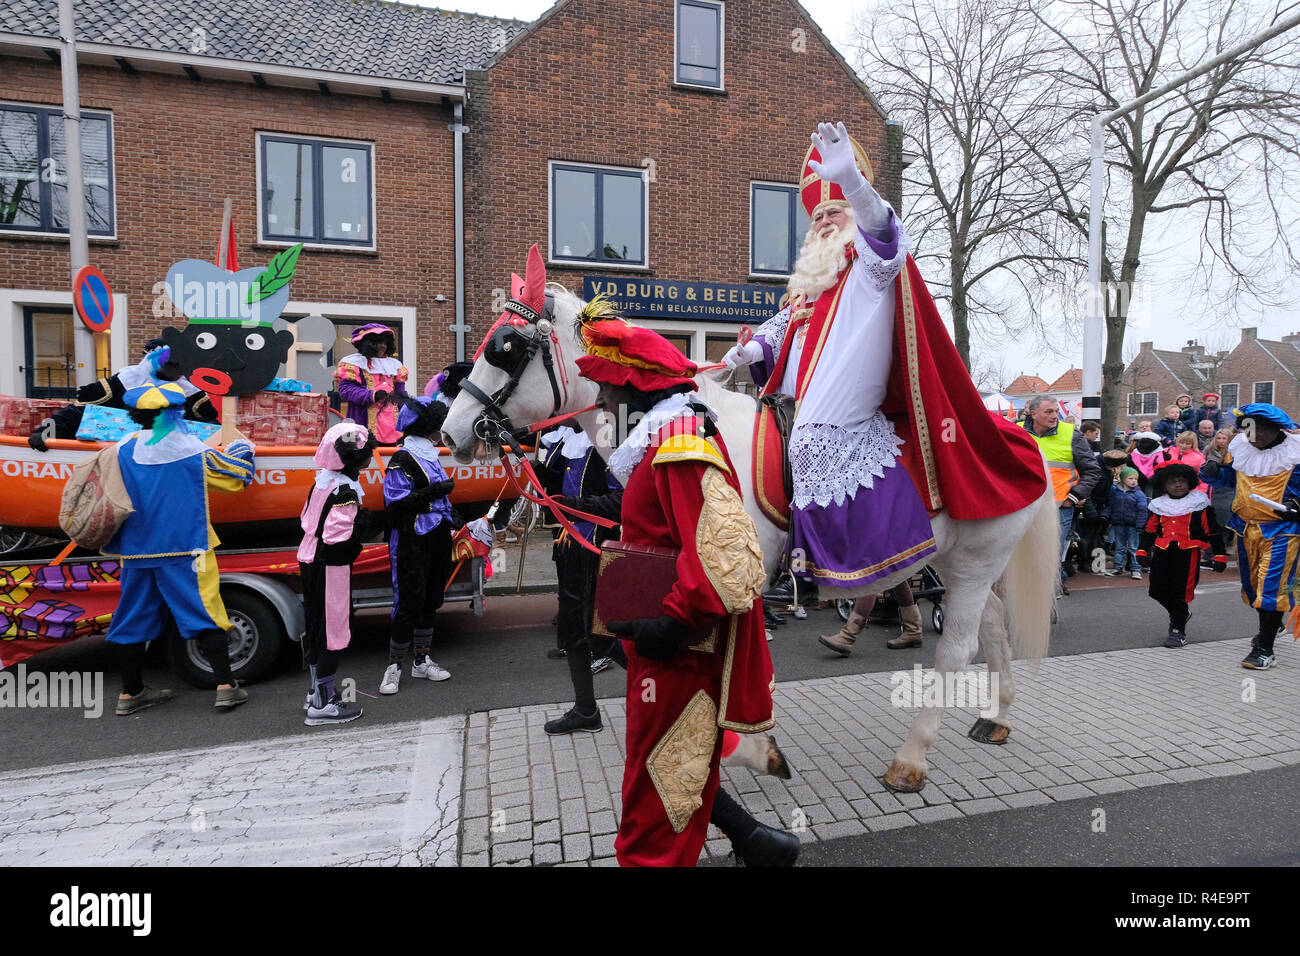 Graveren Effectief Beheer Sinterklaas (St. Nicholas), accompanied by people dressed as traditional  characters known as Zwarte Piet or Black Pete, ride a horse as children  wave during a parade November 24, 2018, in Katwijk, Netherlands.